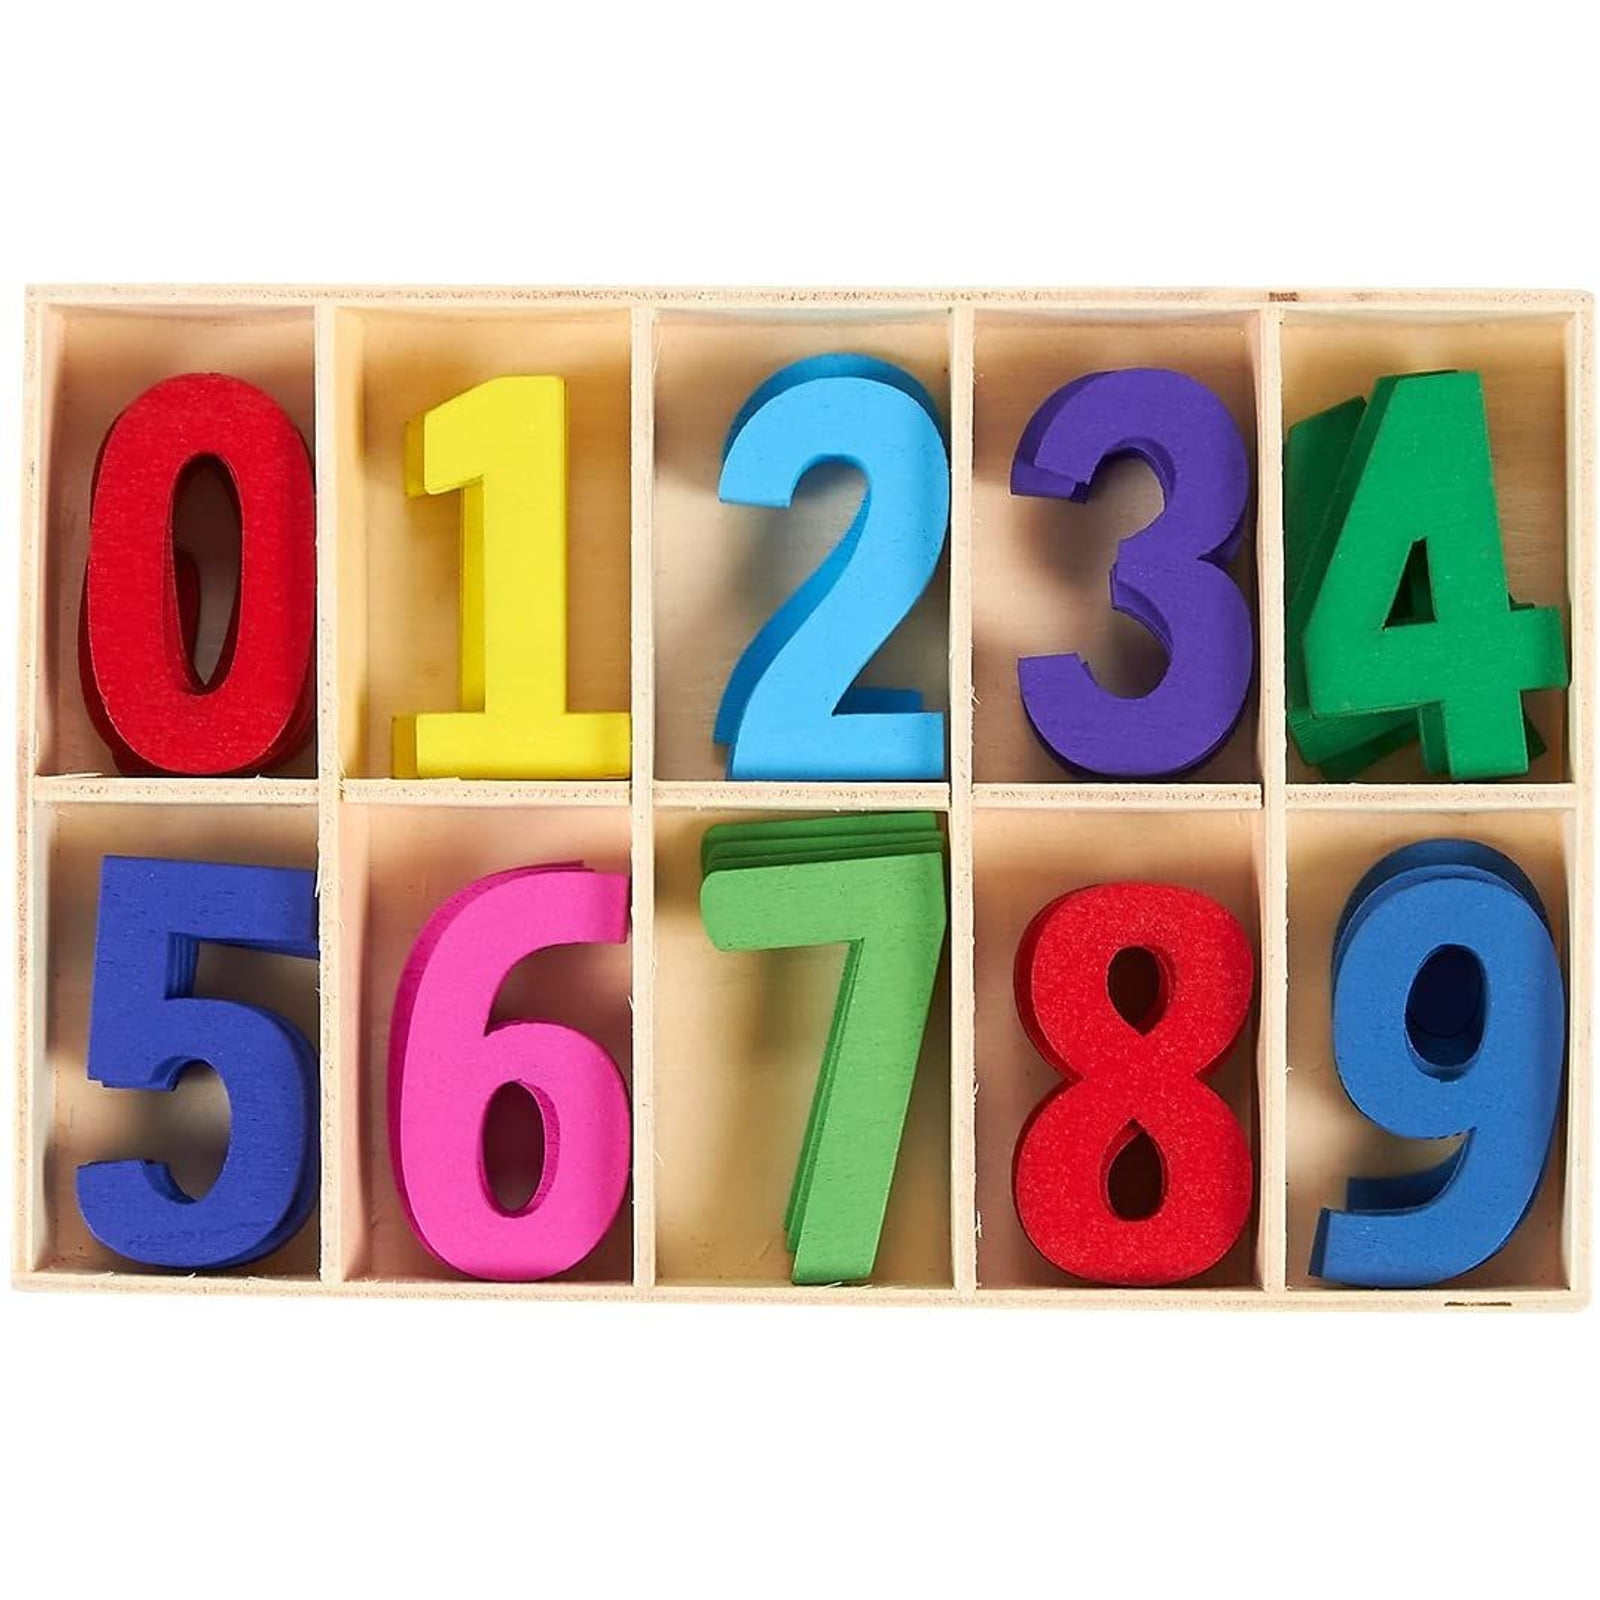 Educational Toy With 10 Numbers 3 for sale online Melissa & Doug Number Matching Math Bus 